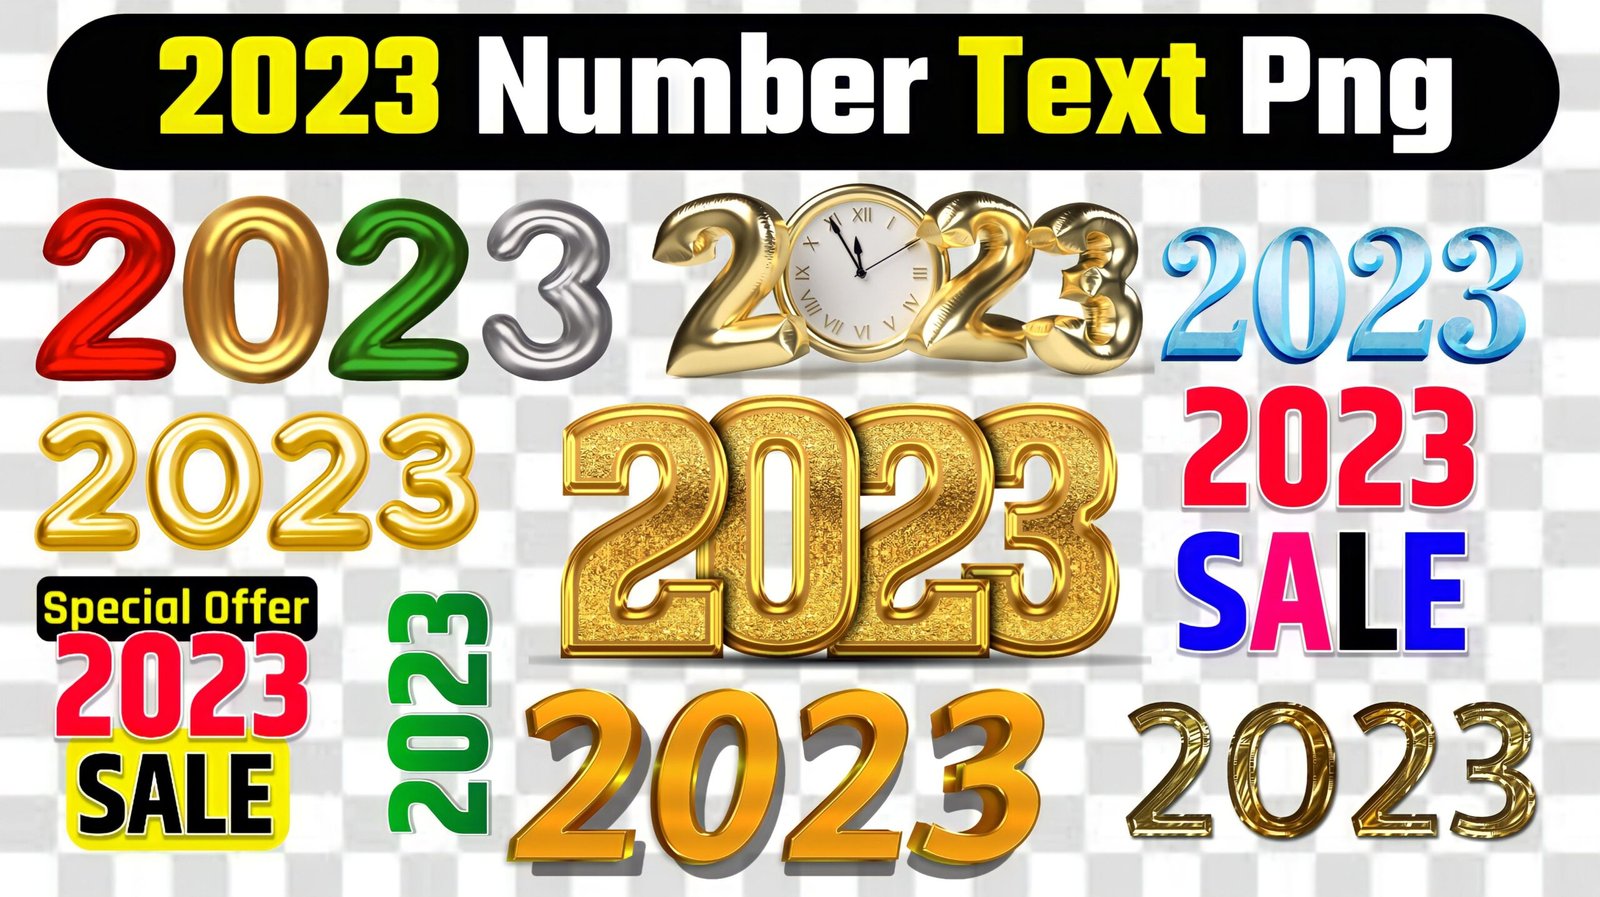 2023 Png transparent image| 2023 Number Text Png images download| happy new year 2023 png images